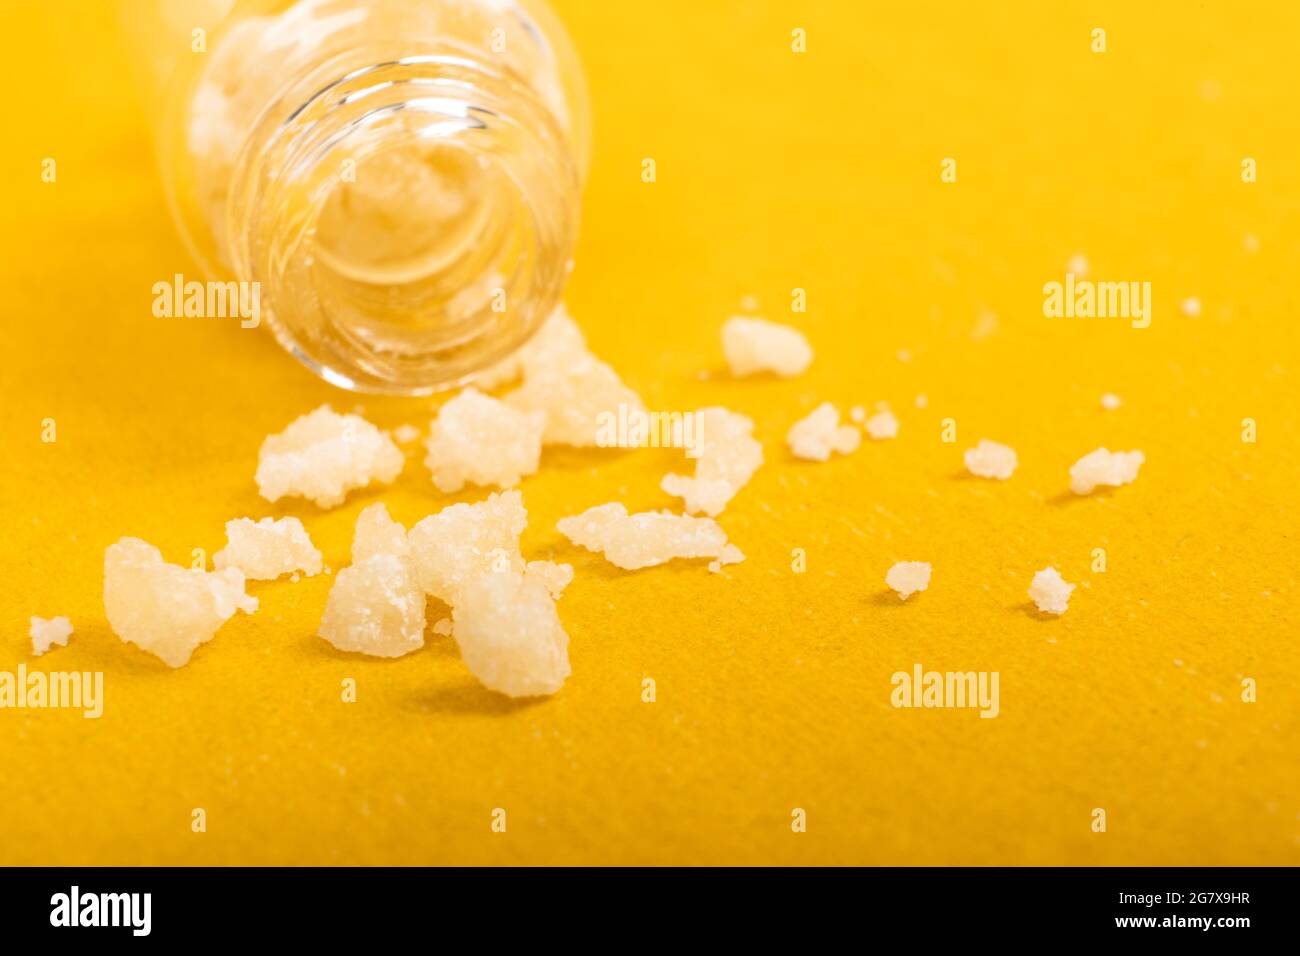 narcotic salt crystals amphetamine on yellow background. Stock Photo